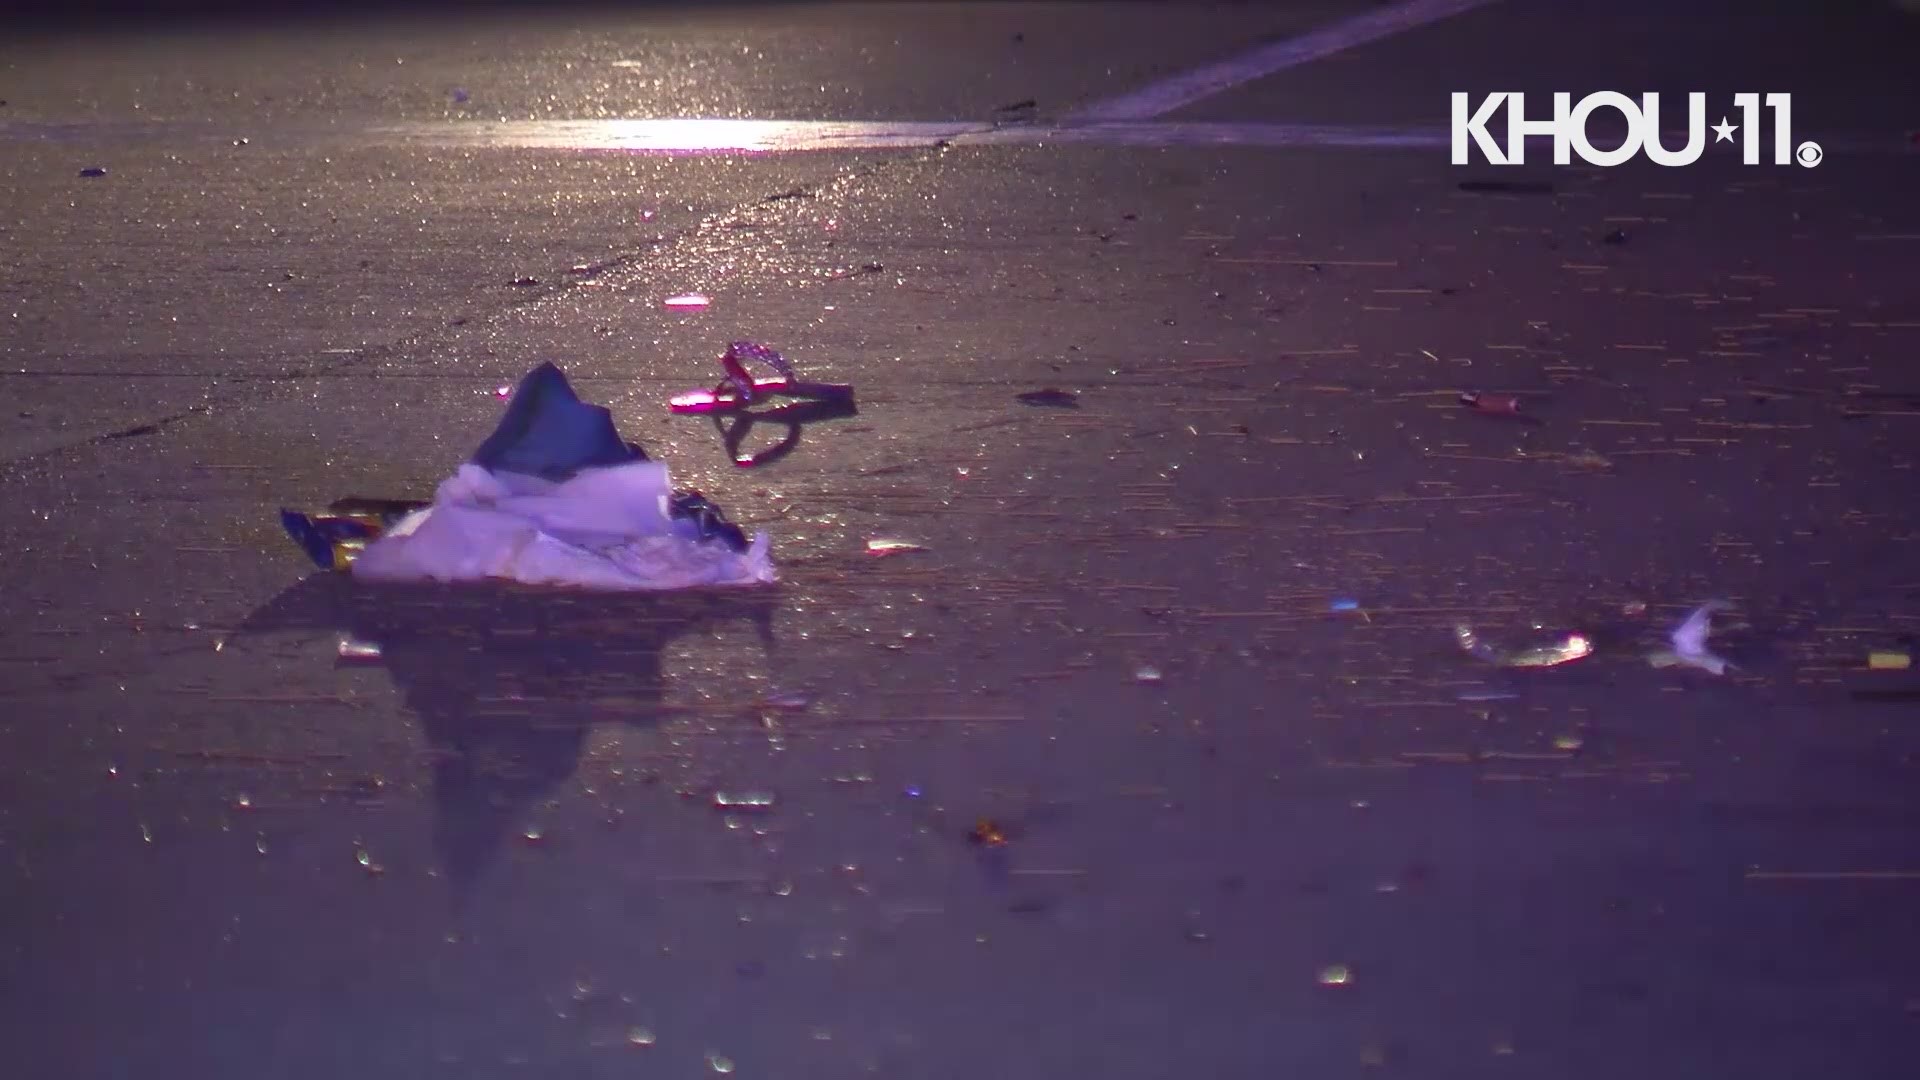 A woman was struck and killed by an SUV on Monday at an intersection near Klein High School.